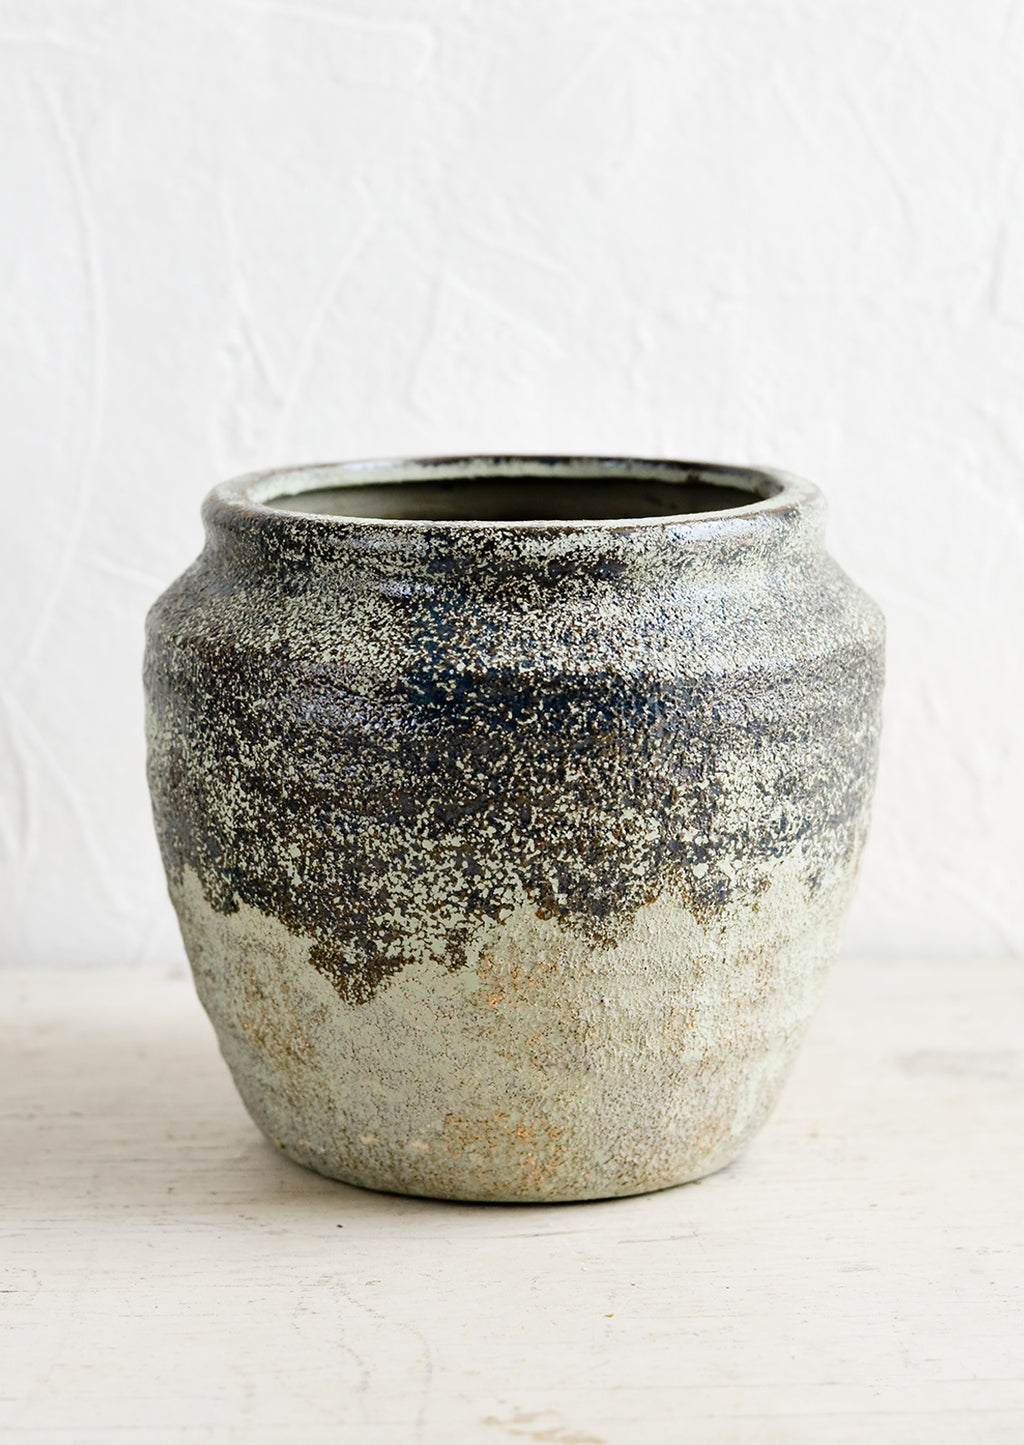 1: A ceramic planter in a distressed mossy green patina.